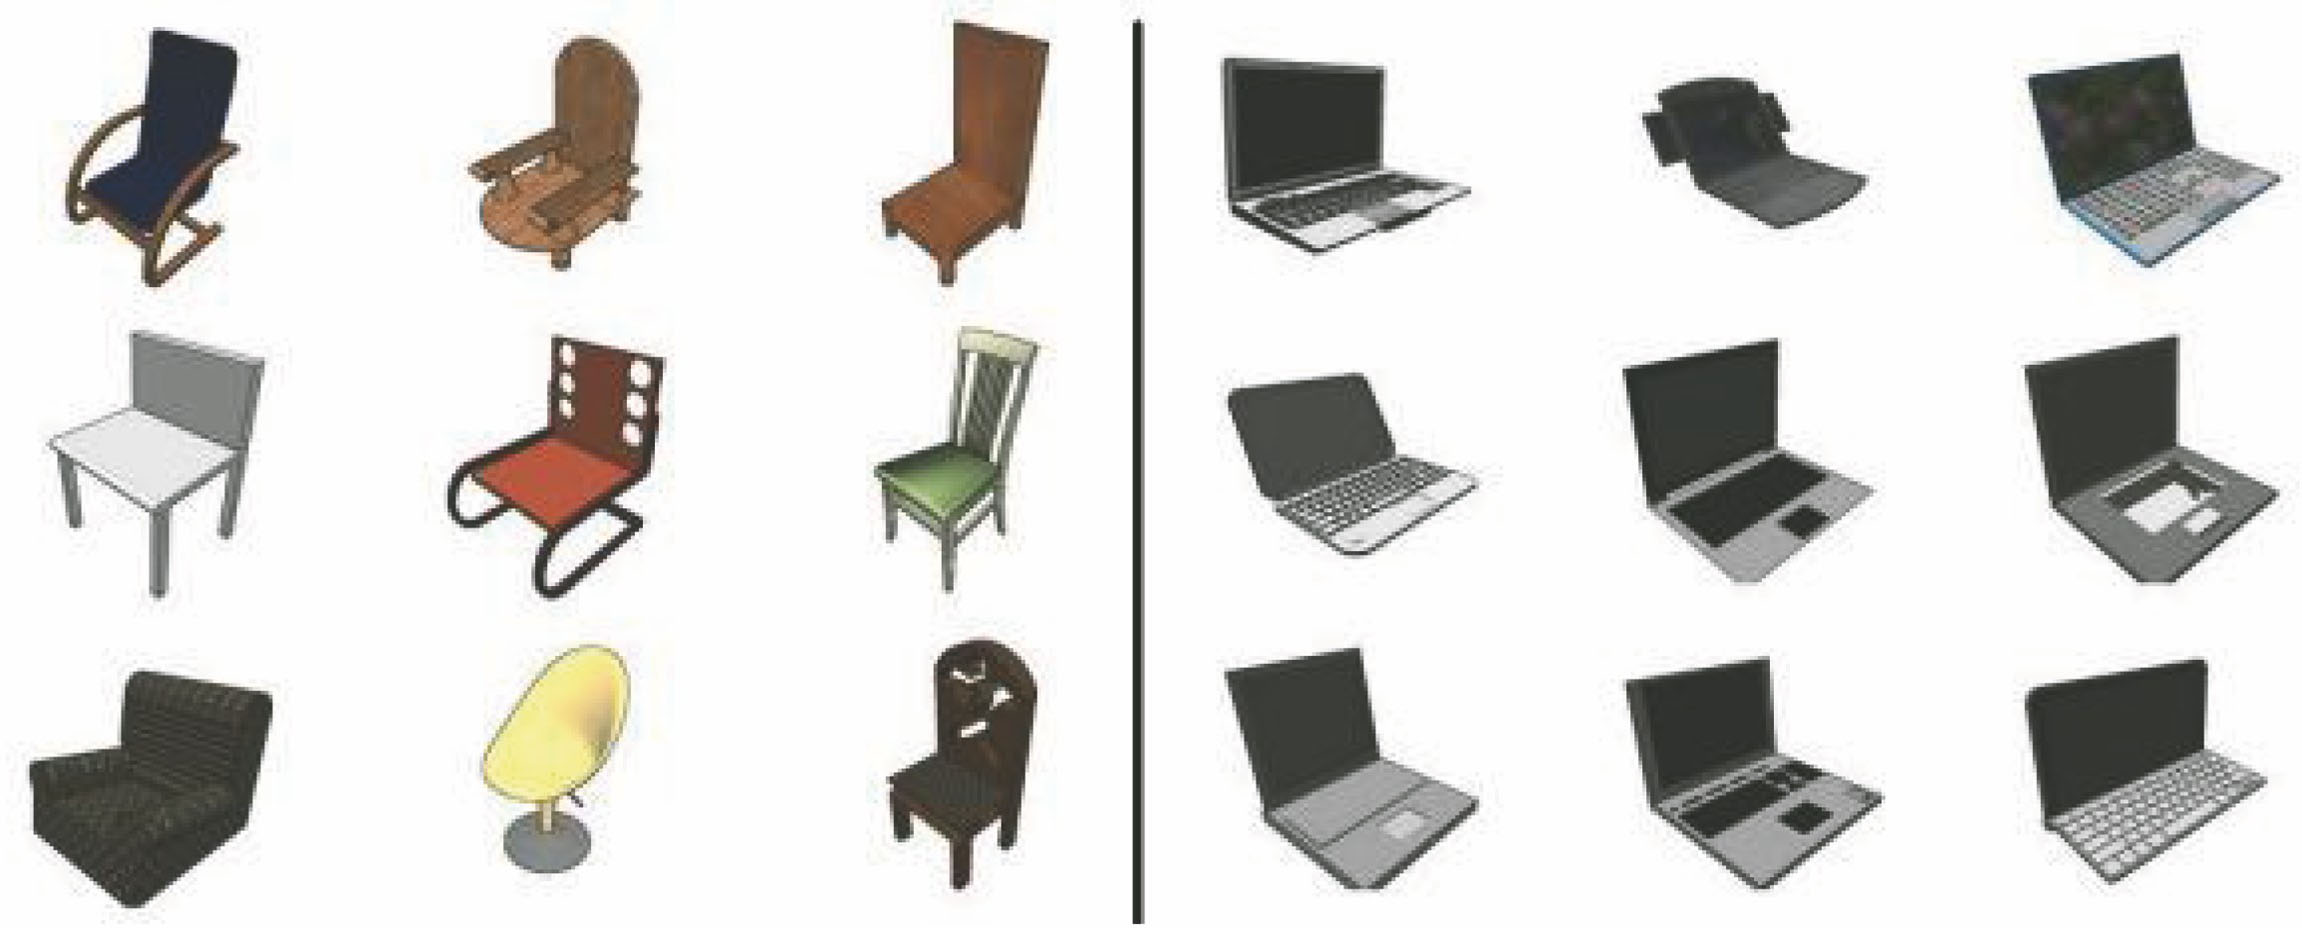 Models of chairs and laptops in the ShapeNet Part dataset[28]